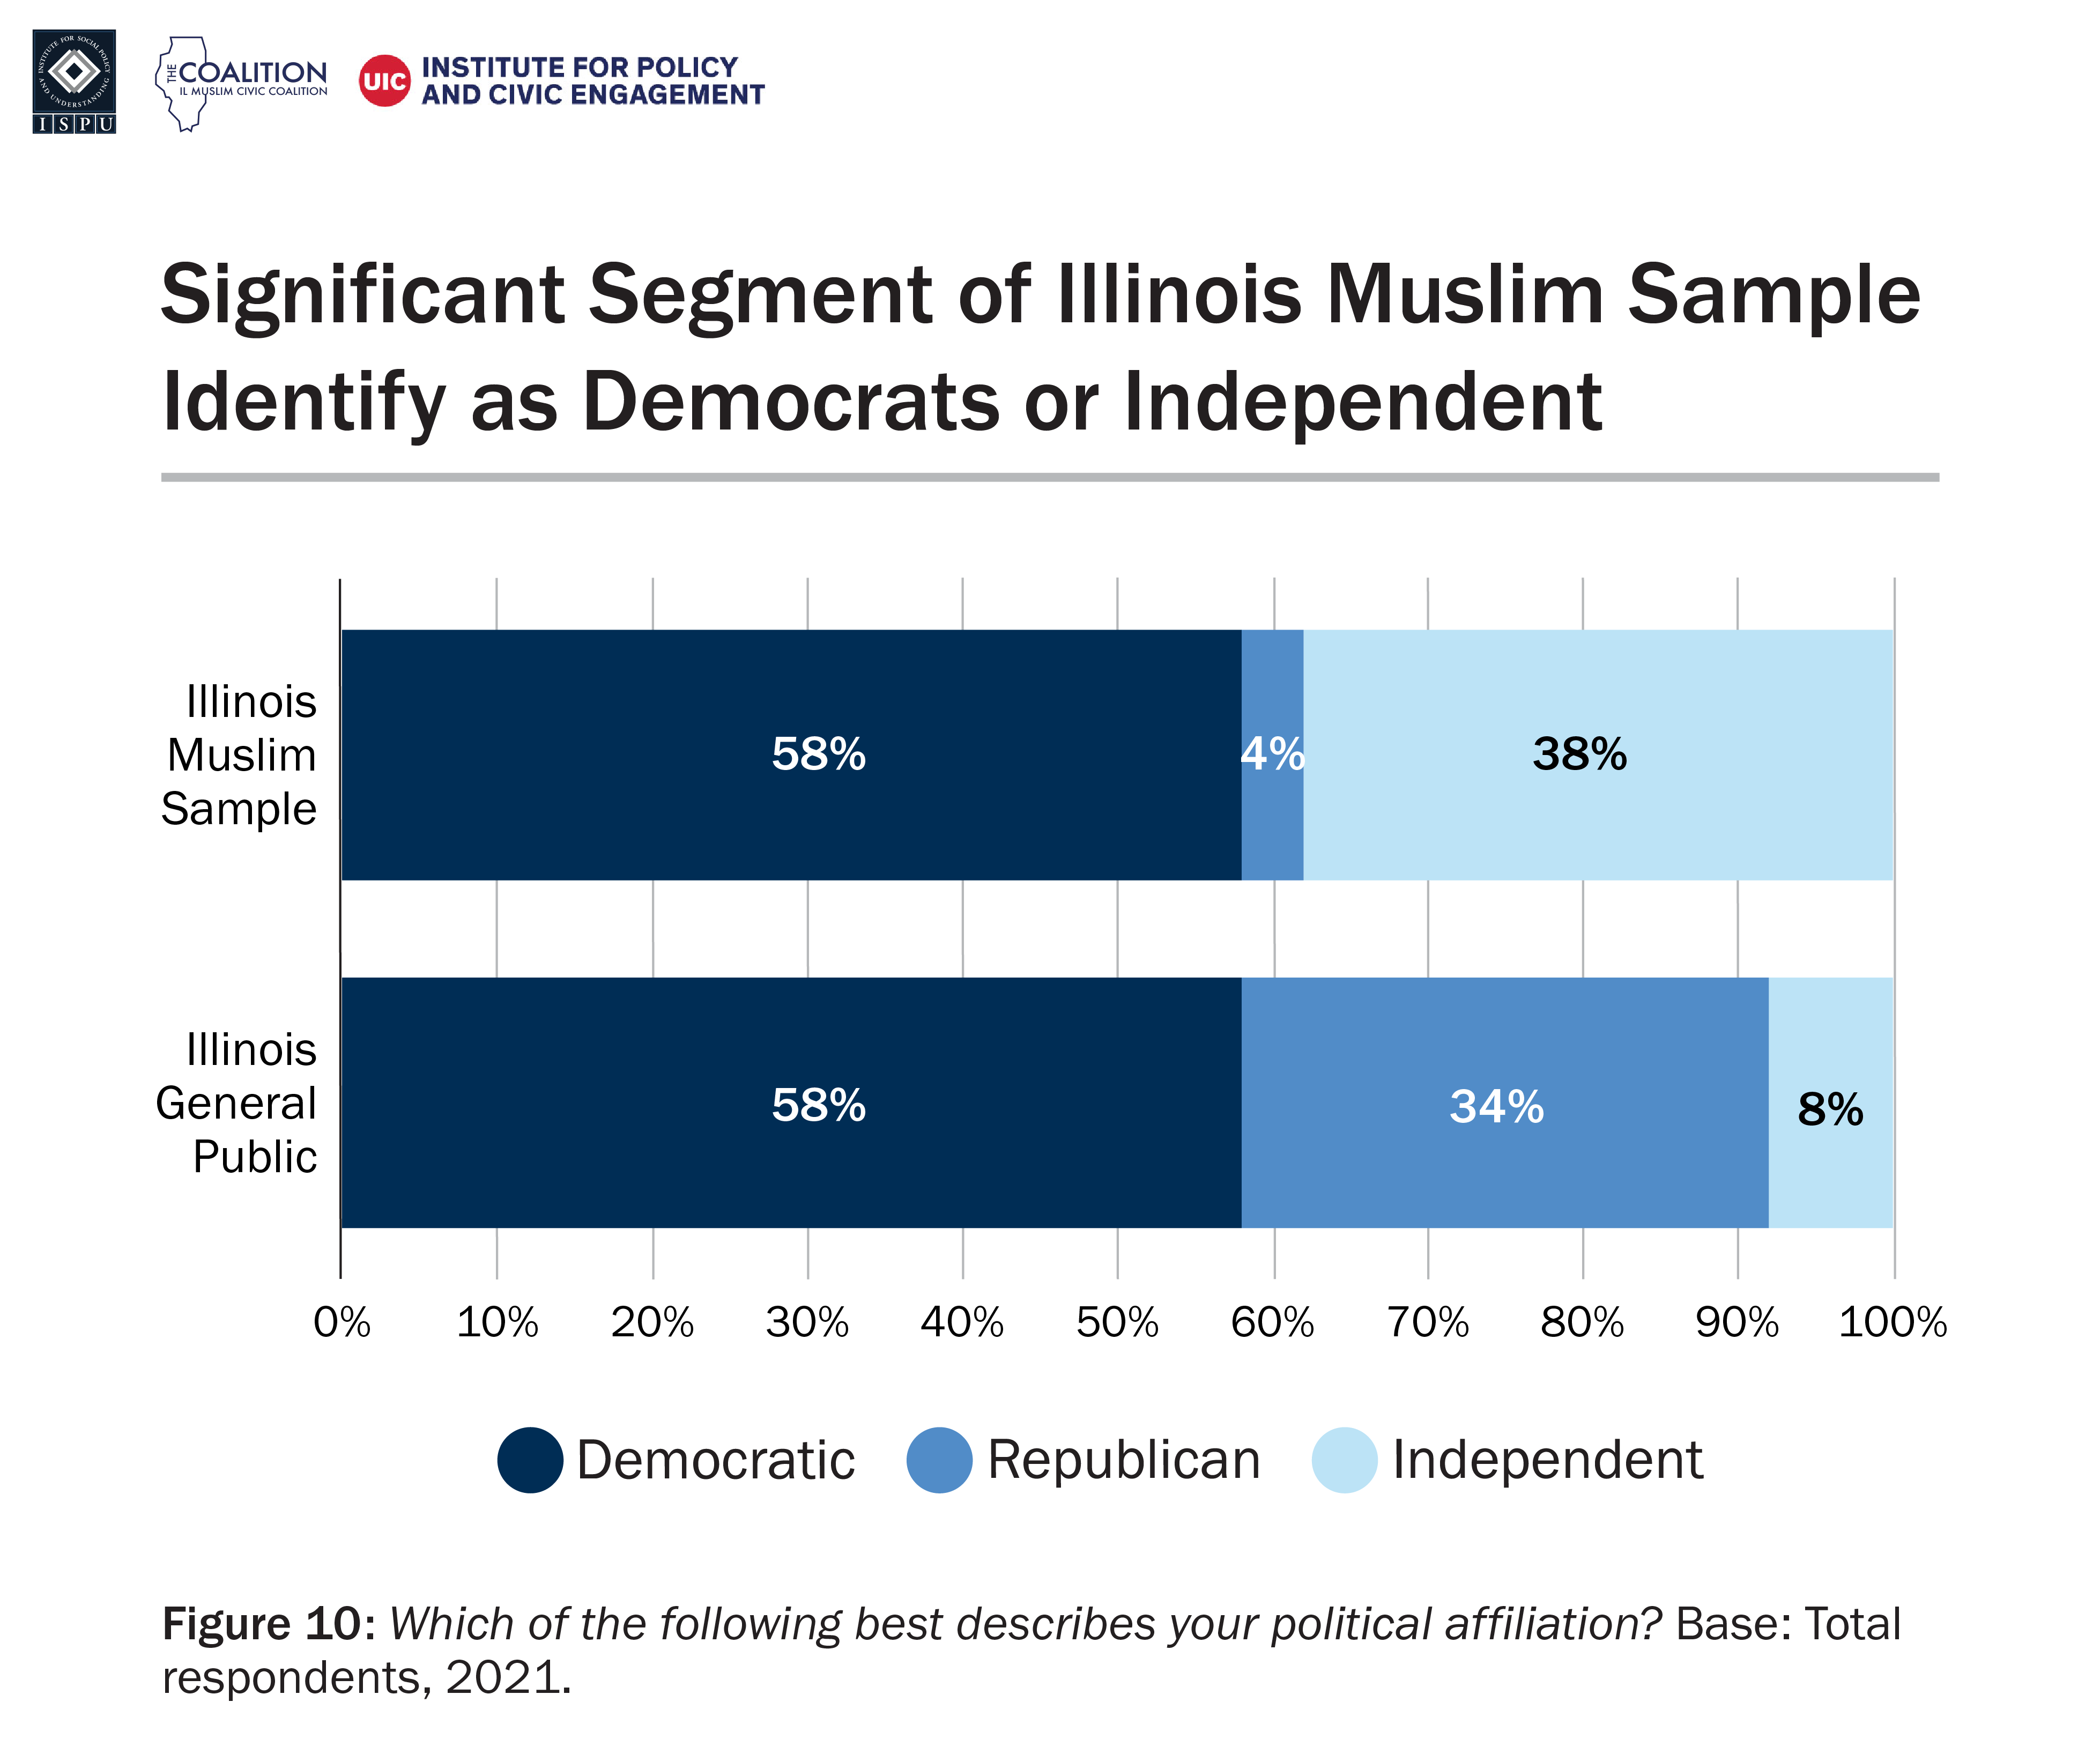 A bar graph with two bars showing political party identification among the Illinois Muslim sample and Illinois general public